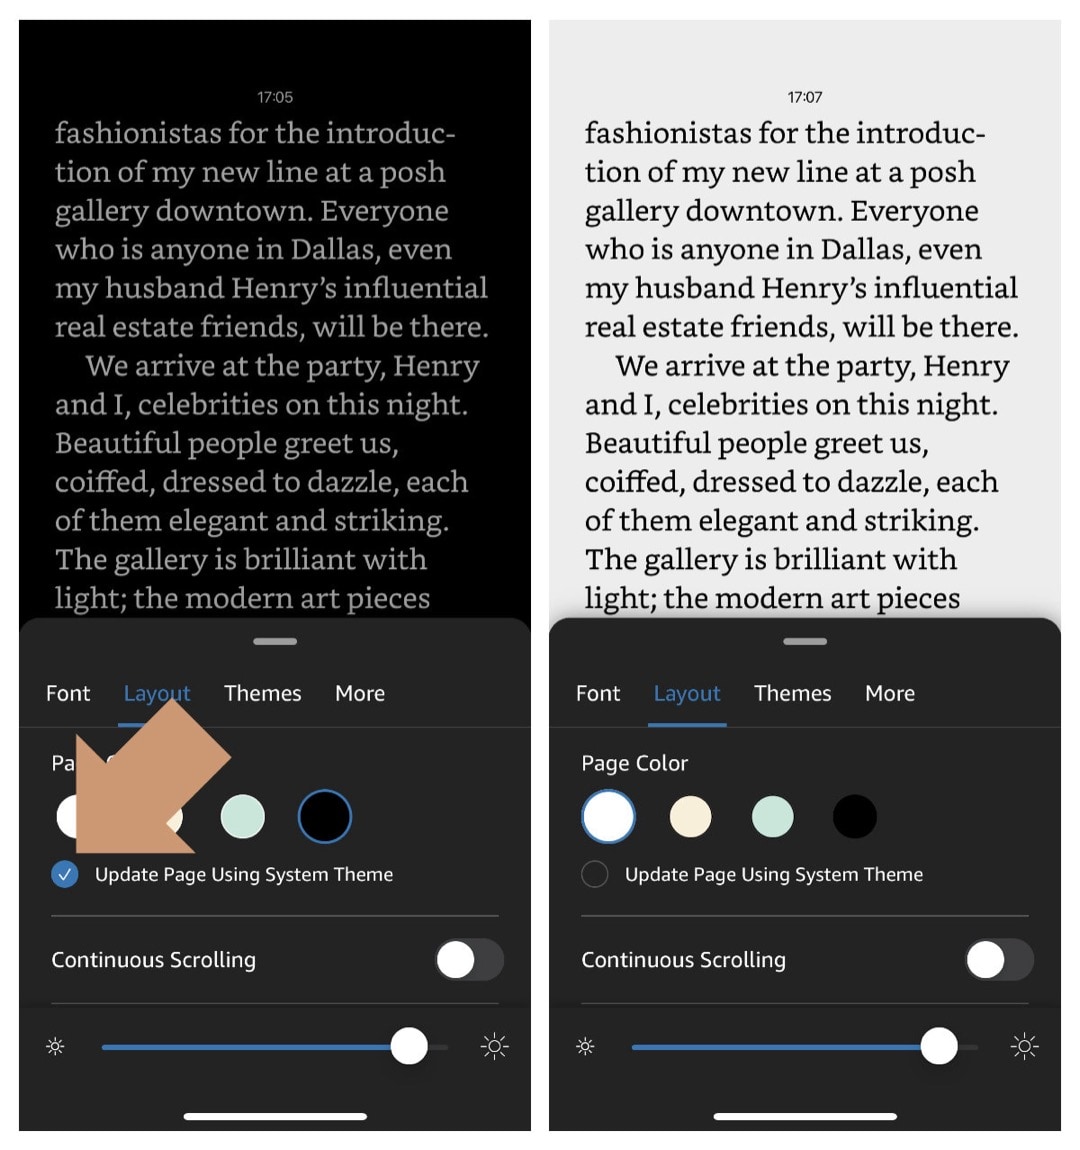 Finally, the Kindle app for iPhone and iPad gets the automatic theme switcher